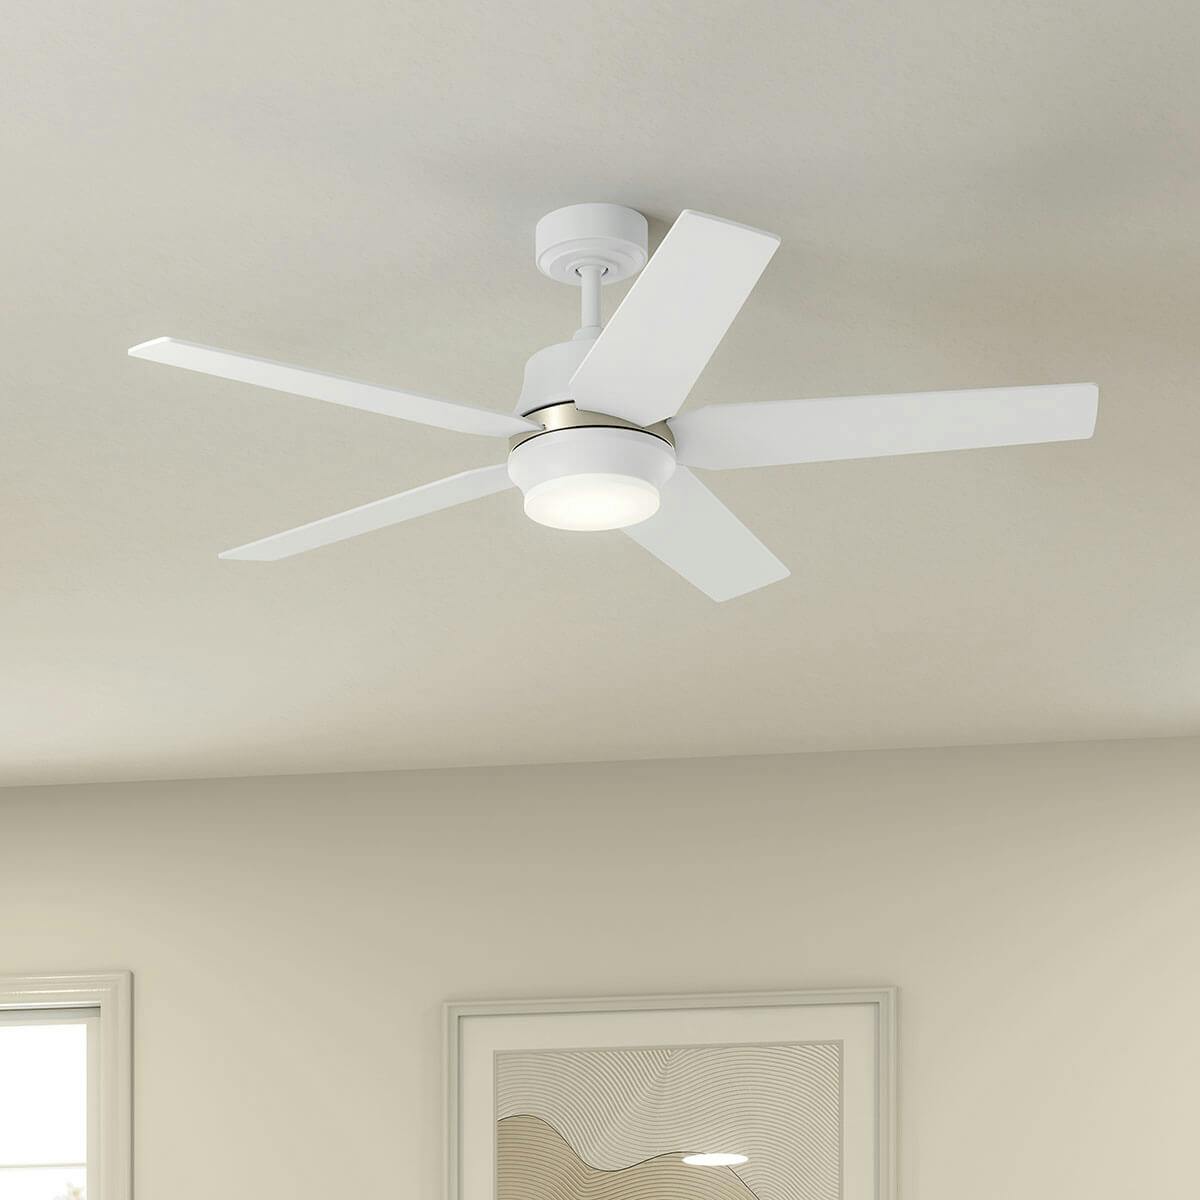 Day time bedroom image featuring Brahm ceiling fan 300059MWH